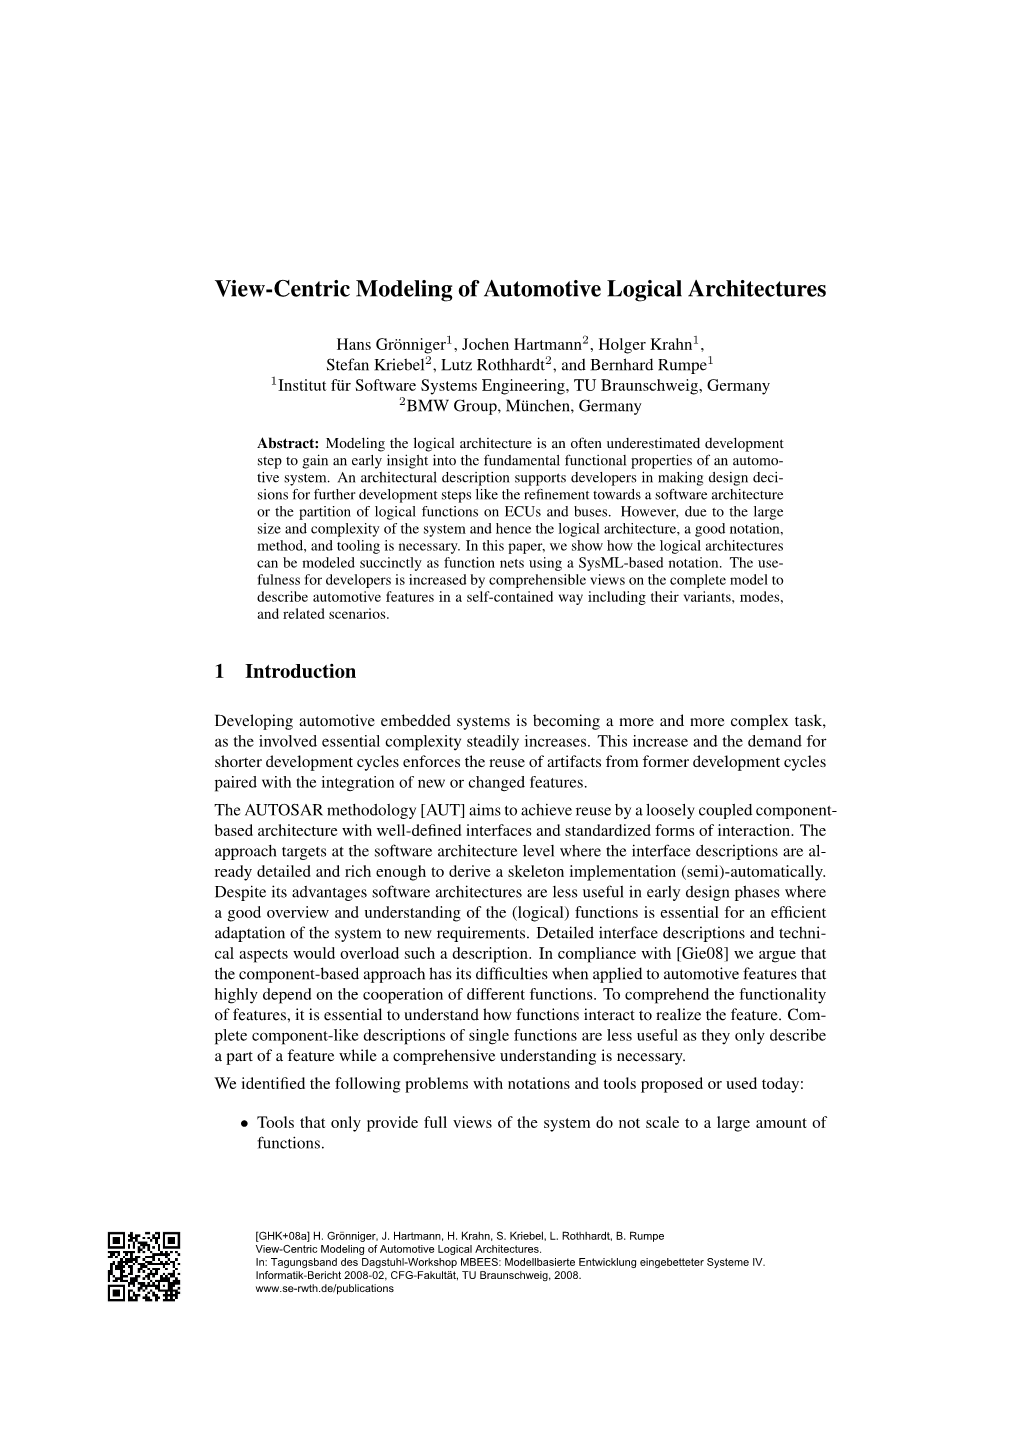 View-Centric Modeling of Automotive Logical Architectures